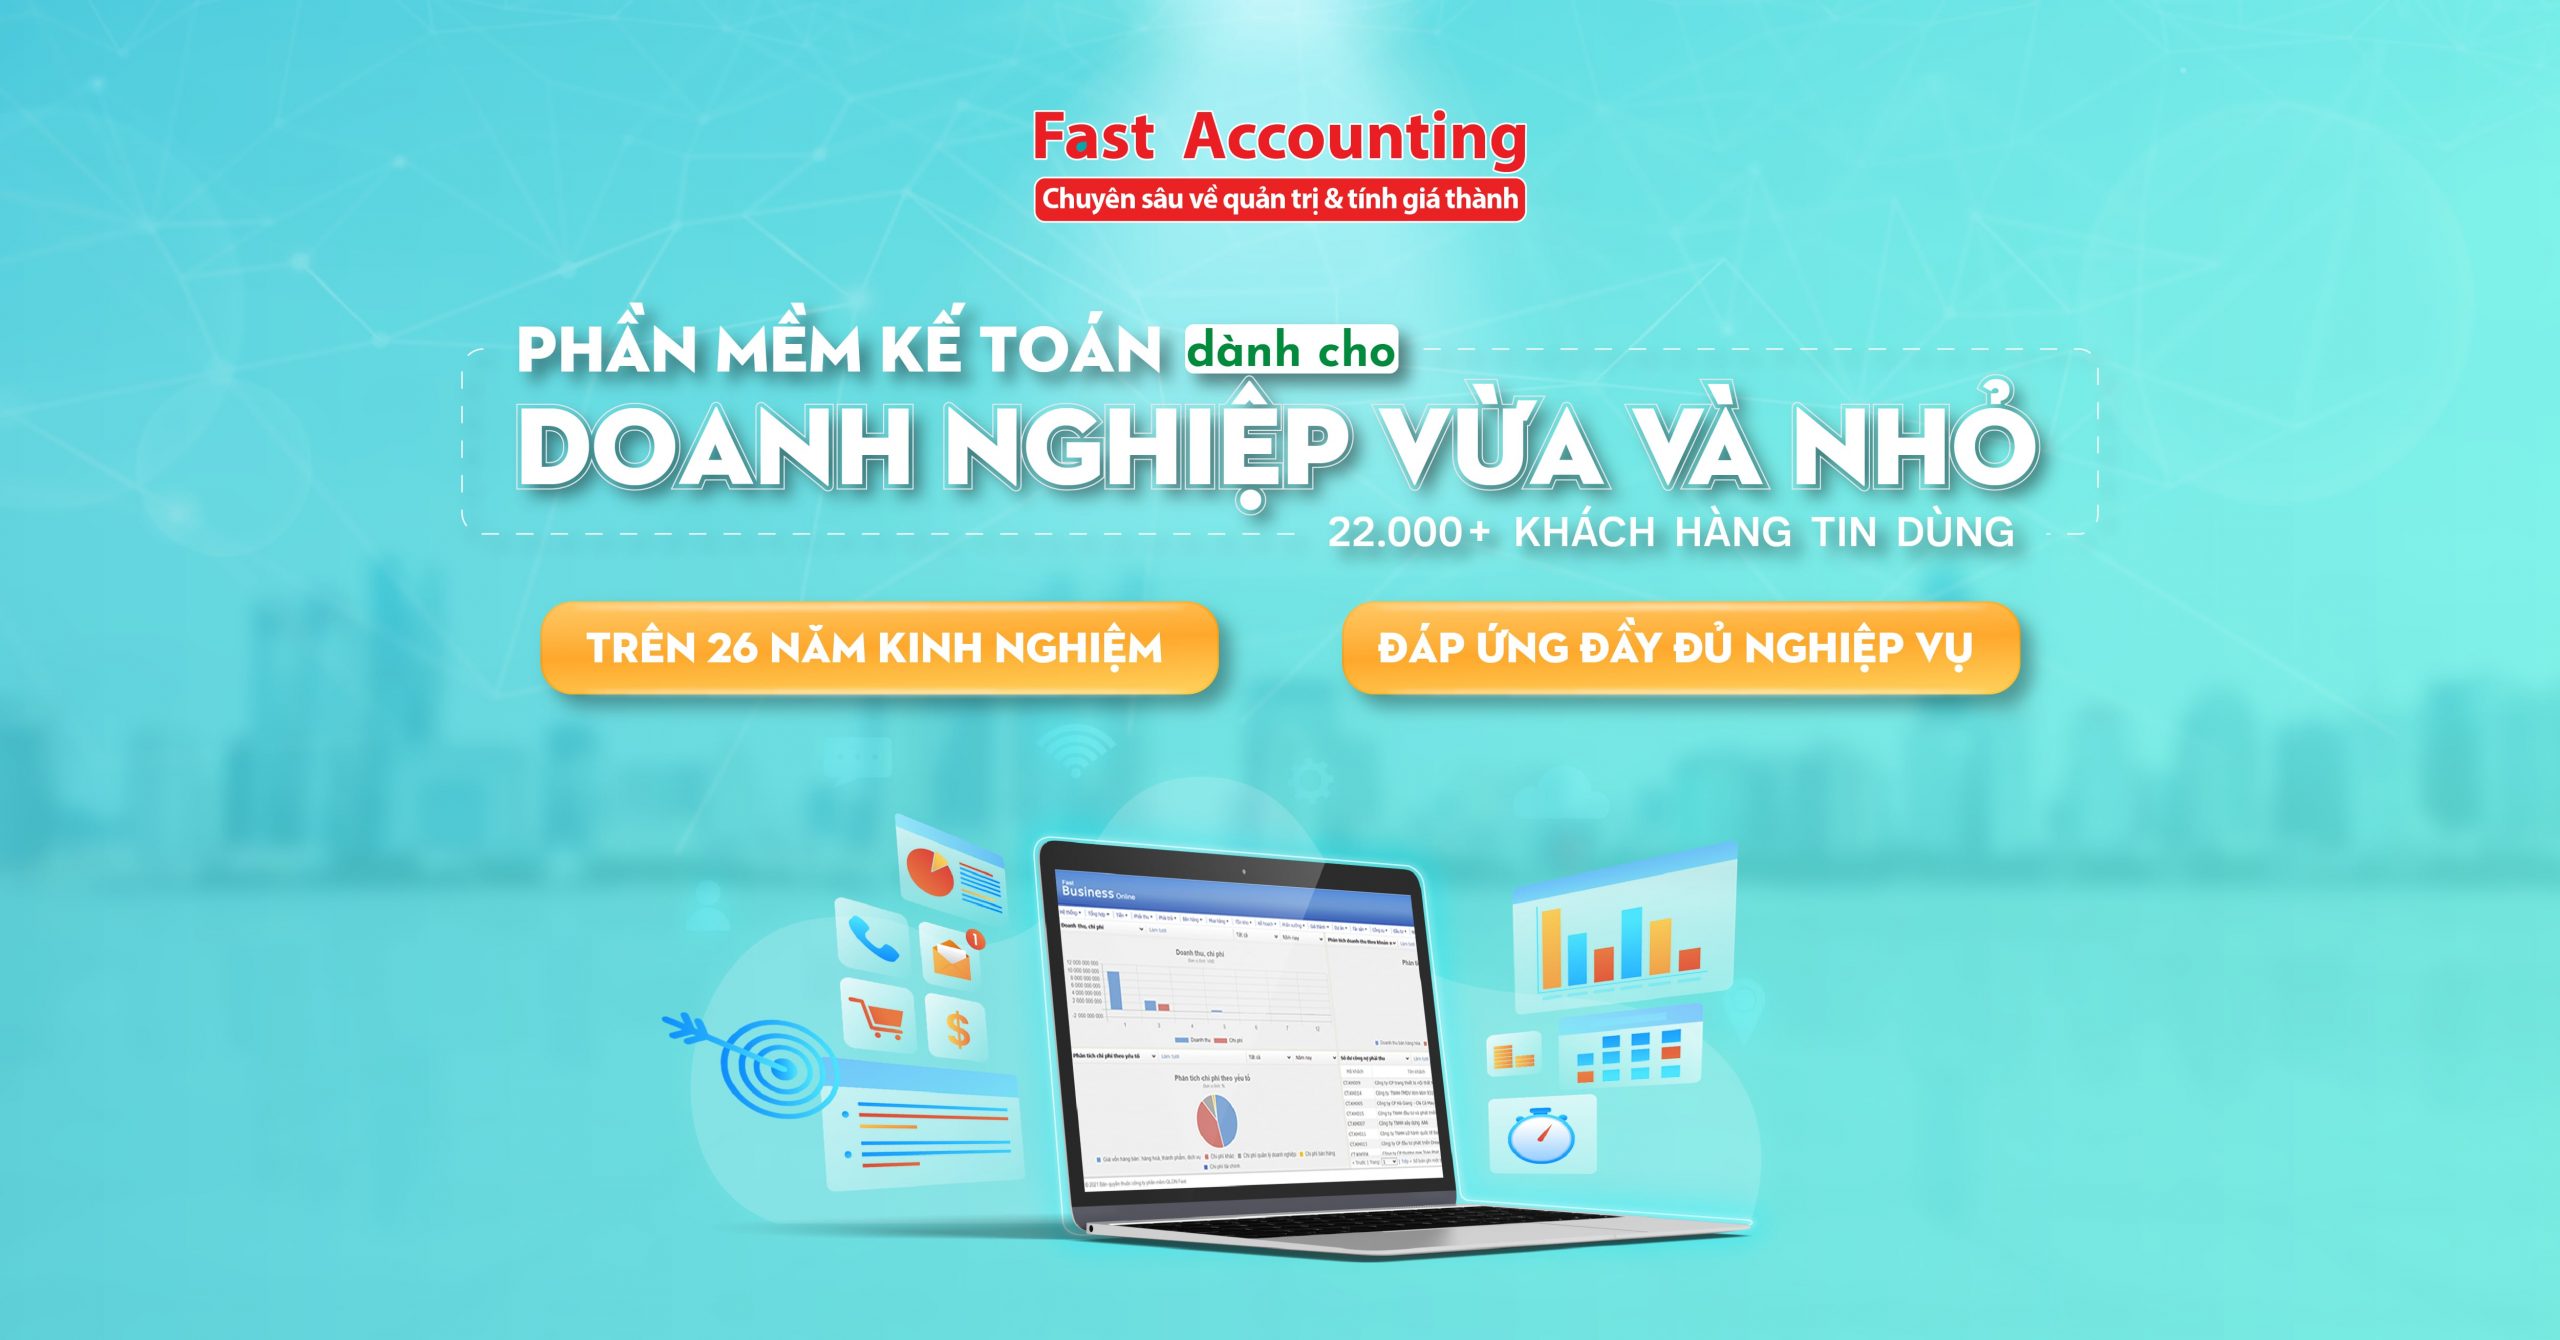 FAST-ACCOUNTING